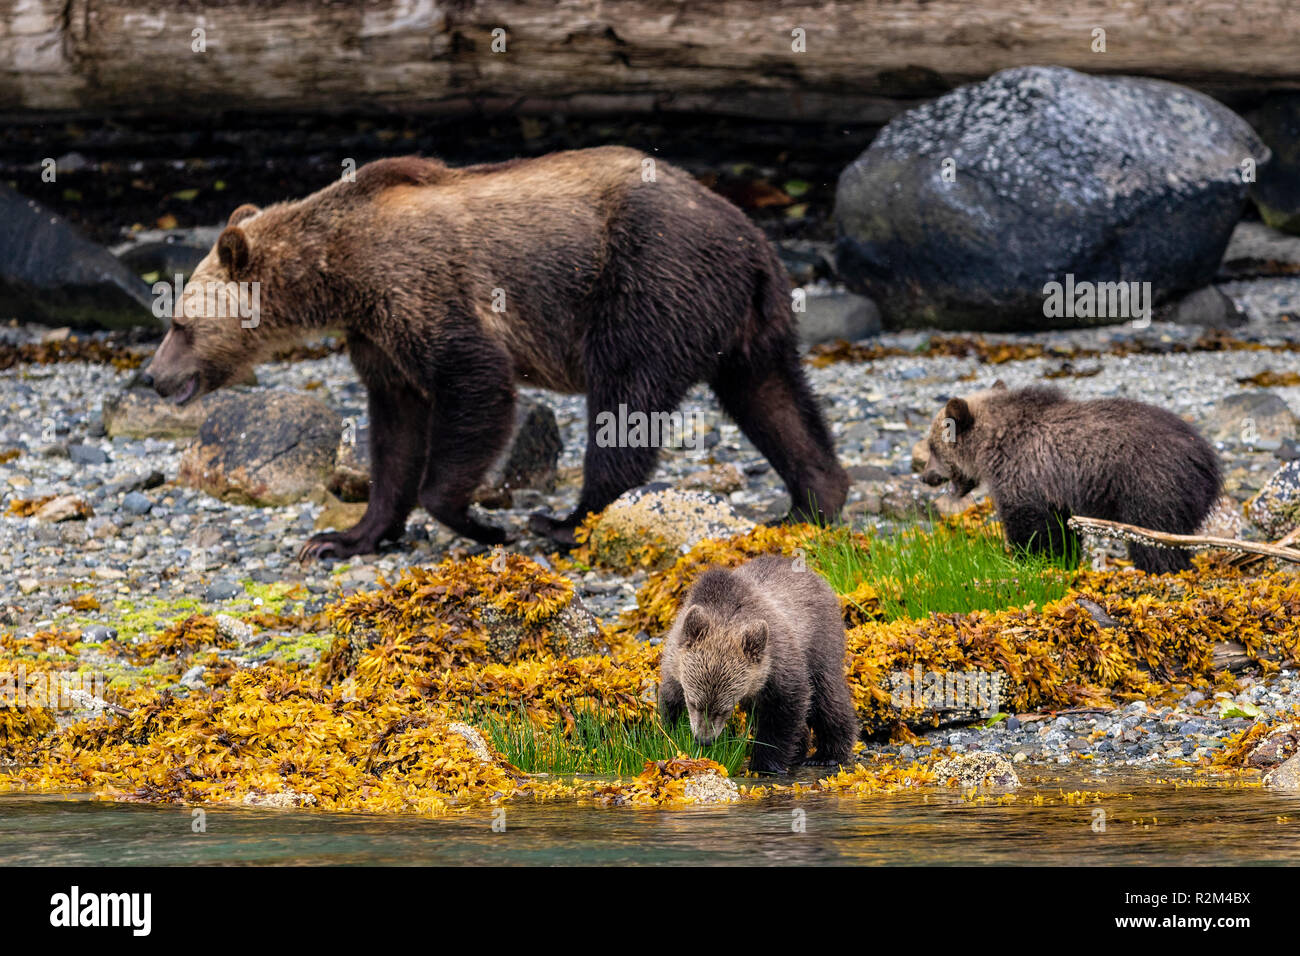 Grizzly bear cub feeding along the low tide line in Knight Inlet, First Nations Territory, British Columbia, Canada. Stock Photo